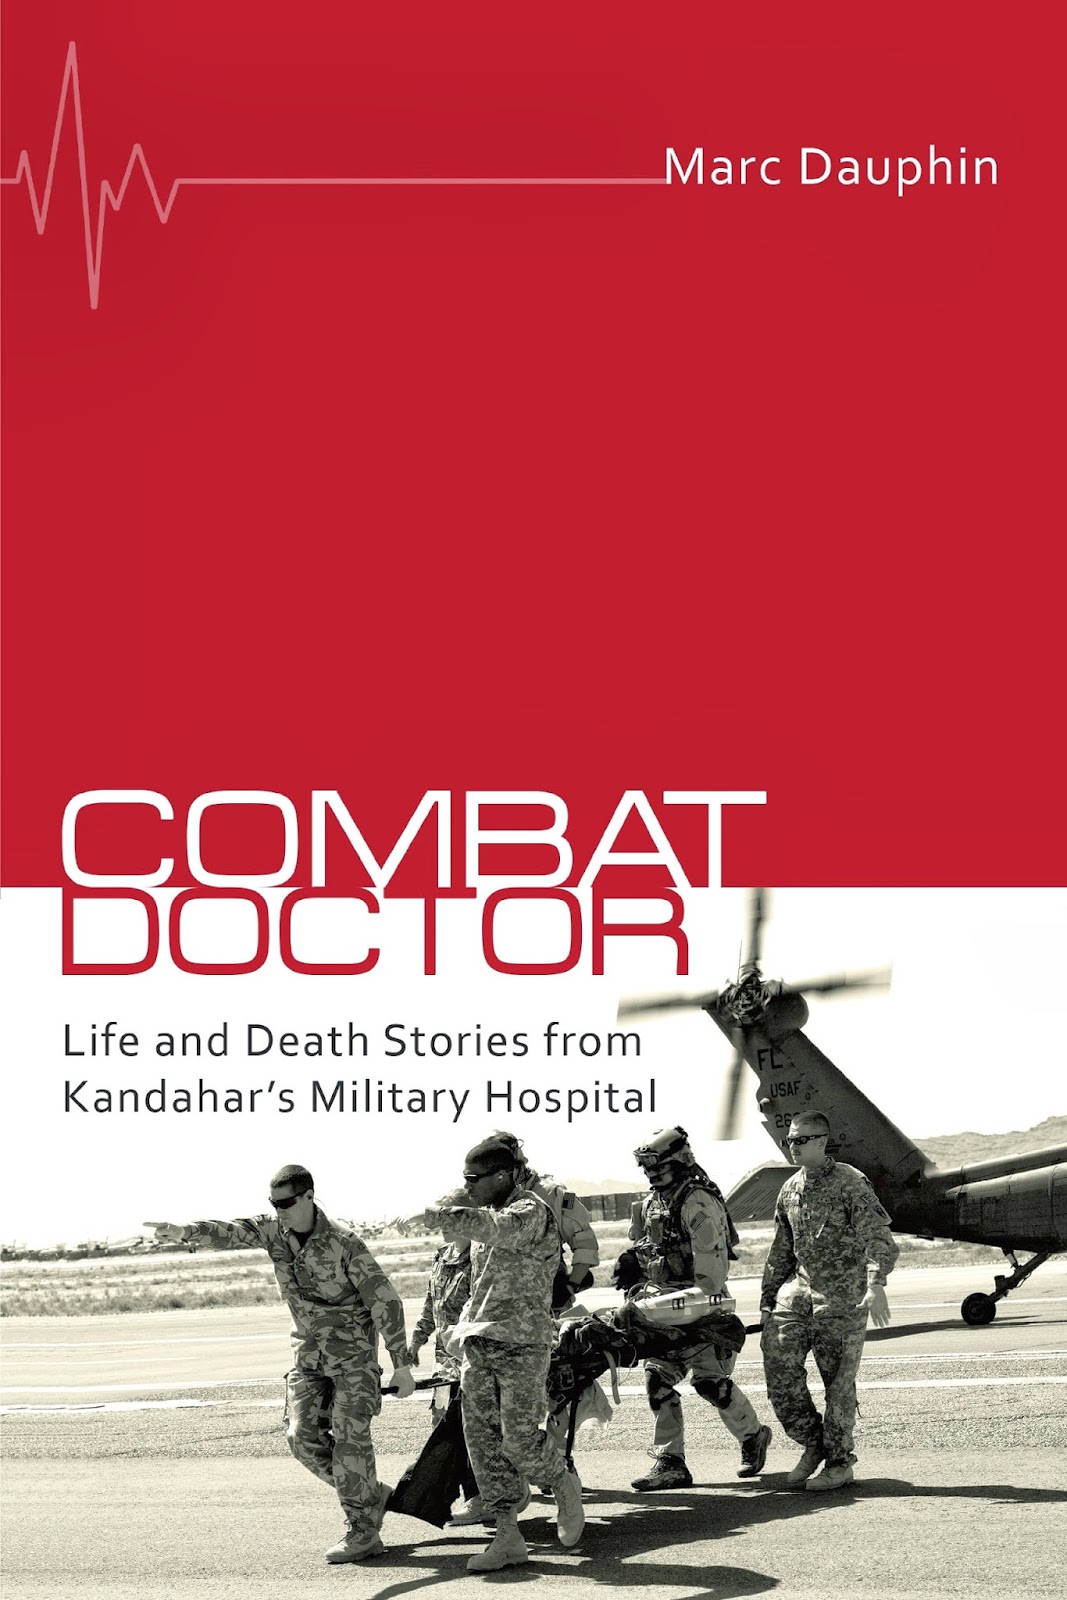 http://discover.halifaxpubliclibraries.ca/?q=title:combat%20doctor%20life%20and%20death